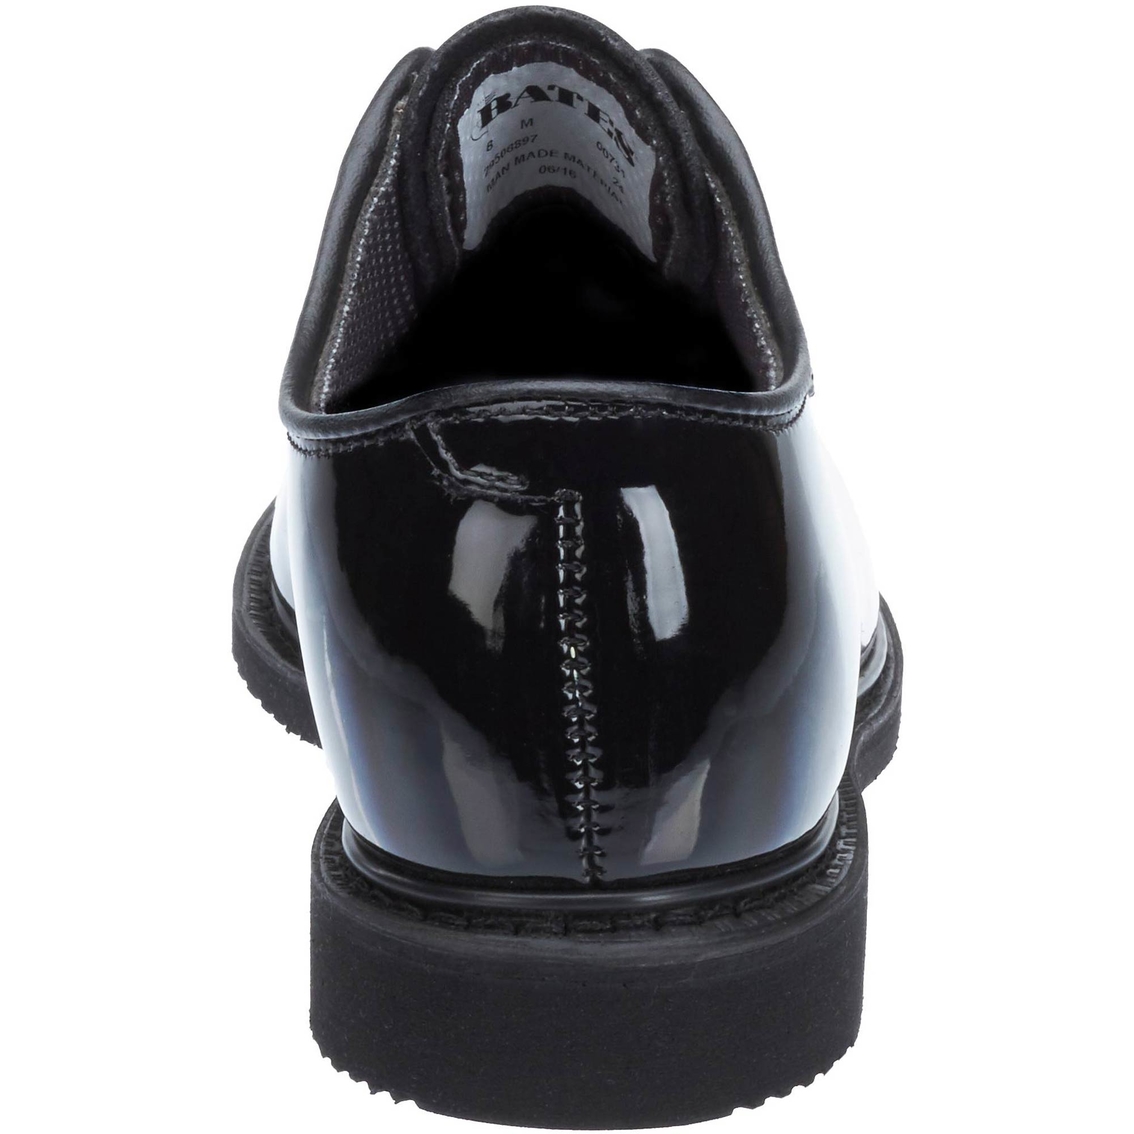 Bate Women's Black Oxford Shoes 731 - Image 4 of 8